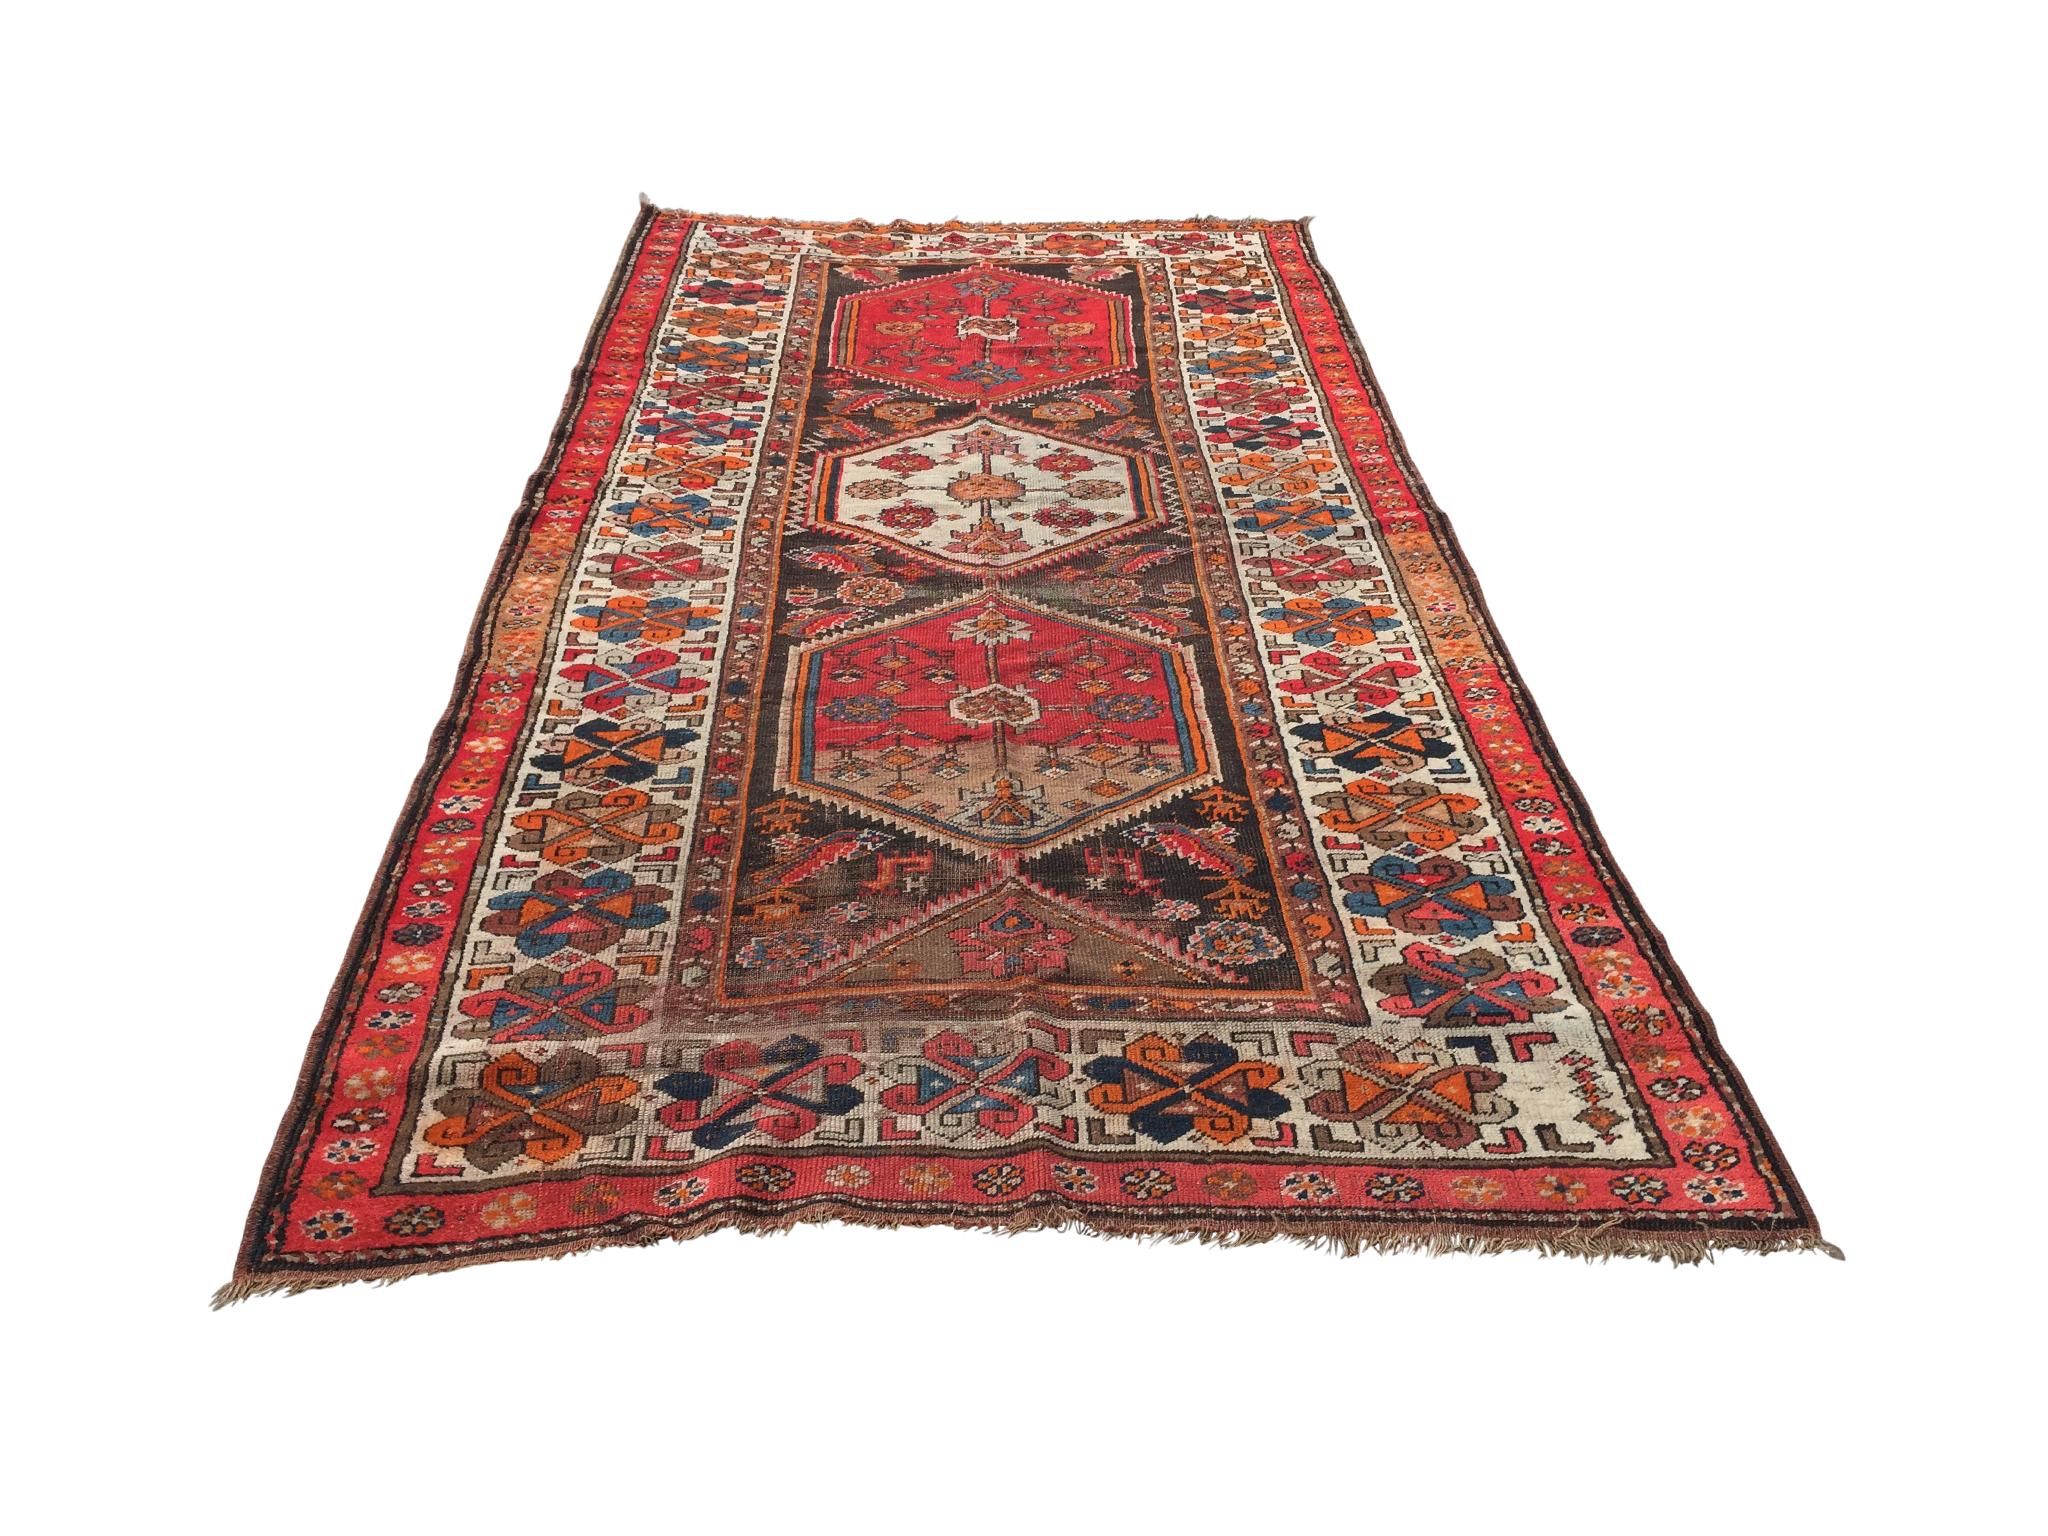 An exceptional Persian runner rug, handwoven in the 1940s. A dynamic design comprised of three central medallions with floral and animal motifs. The wool is dyed in a striking palette of bright reds and oranges, with details in blues, beiges, and